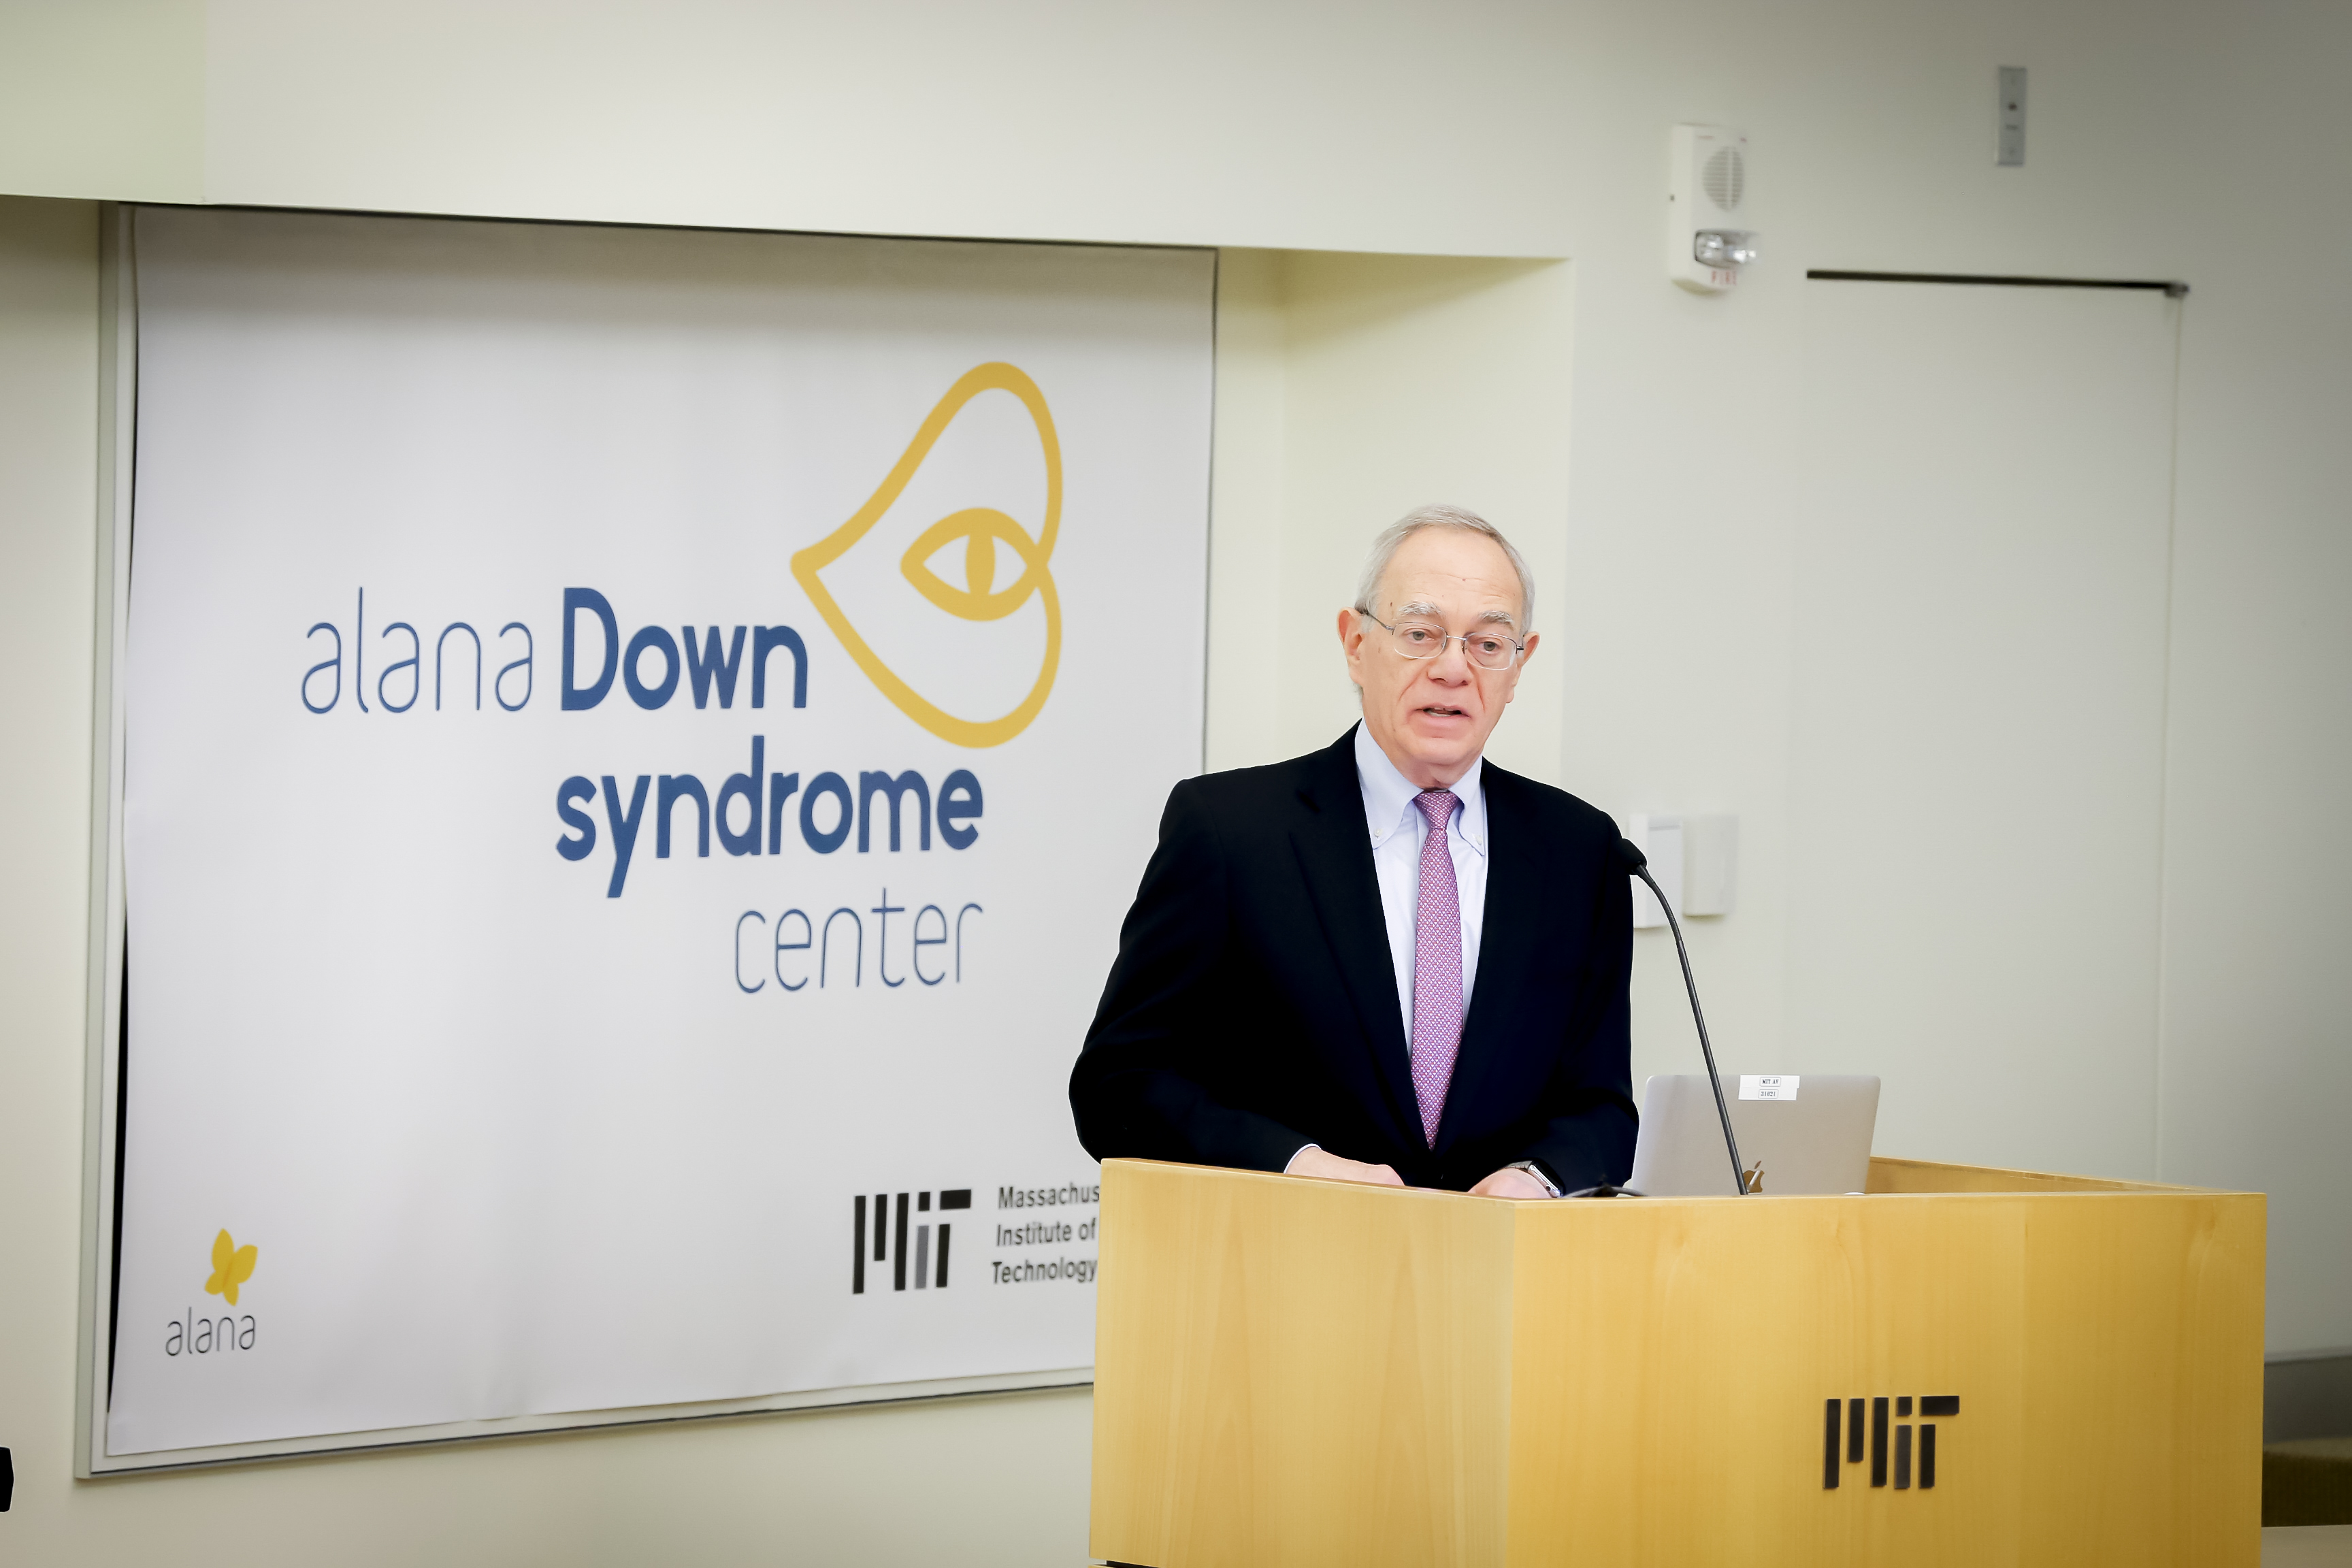 Rafael Reif stands at a lectern with a sign behind him reading Alana Down Syndrome Center